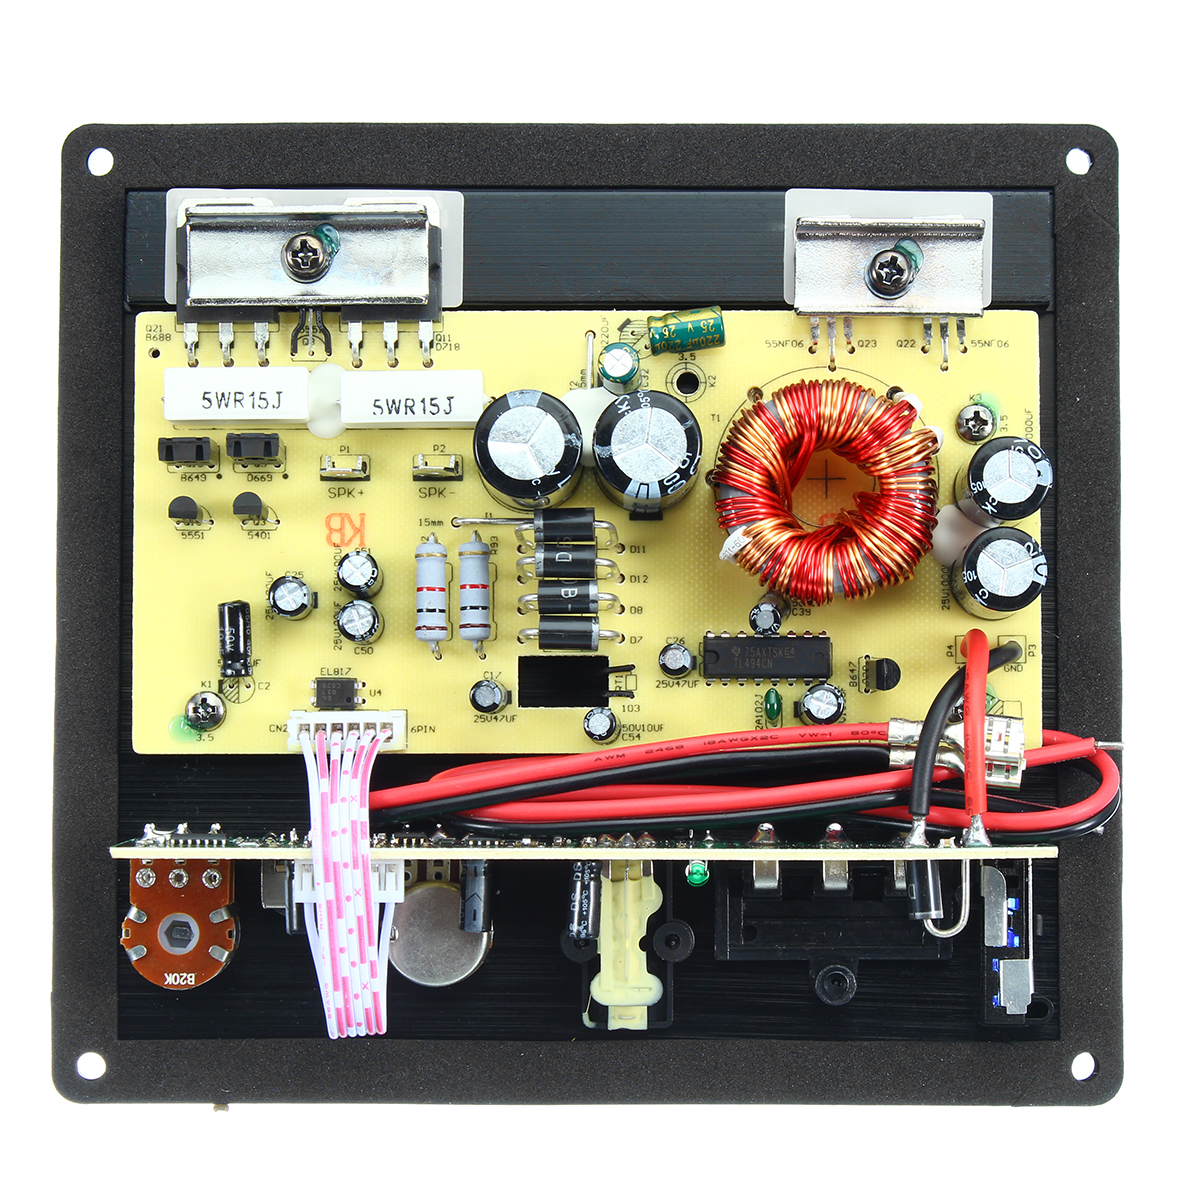 Power-Amplifier-Board-Powerful-Bass-Subwoofer-Amp-Amplify-Module-12V-1200W-for-Car-Audio-Stereo-1293095